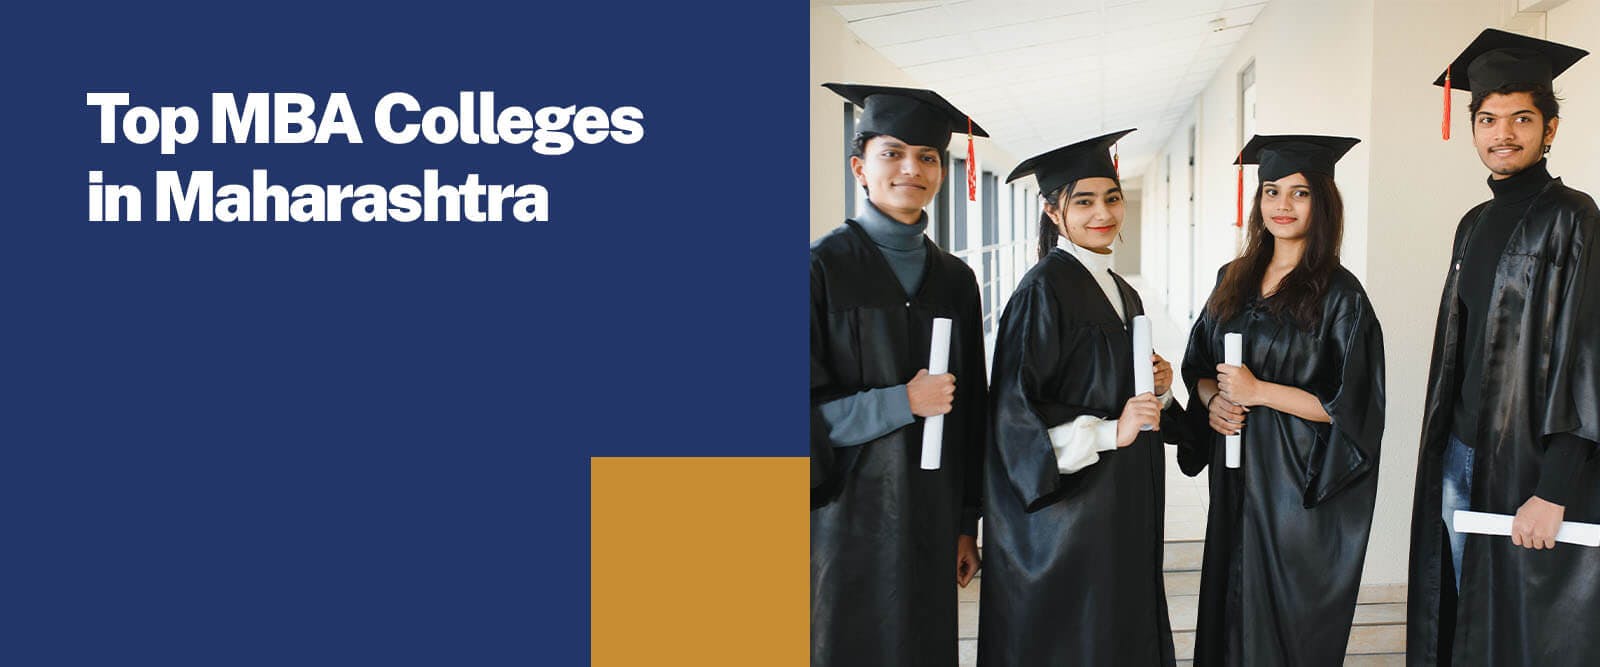 MBA colleges in Maharashtra 